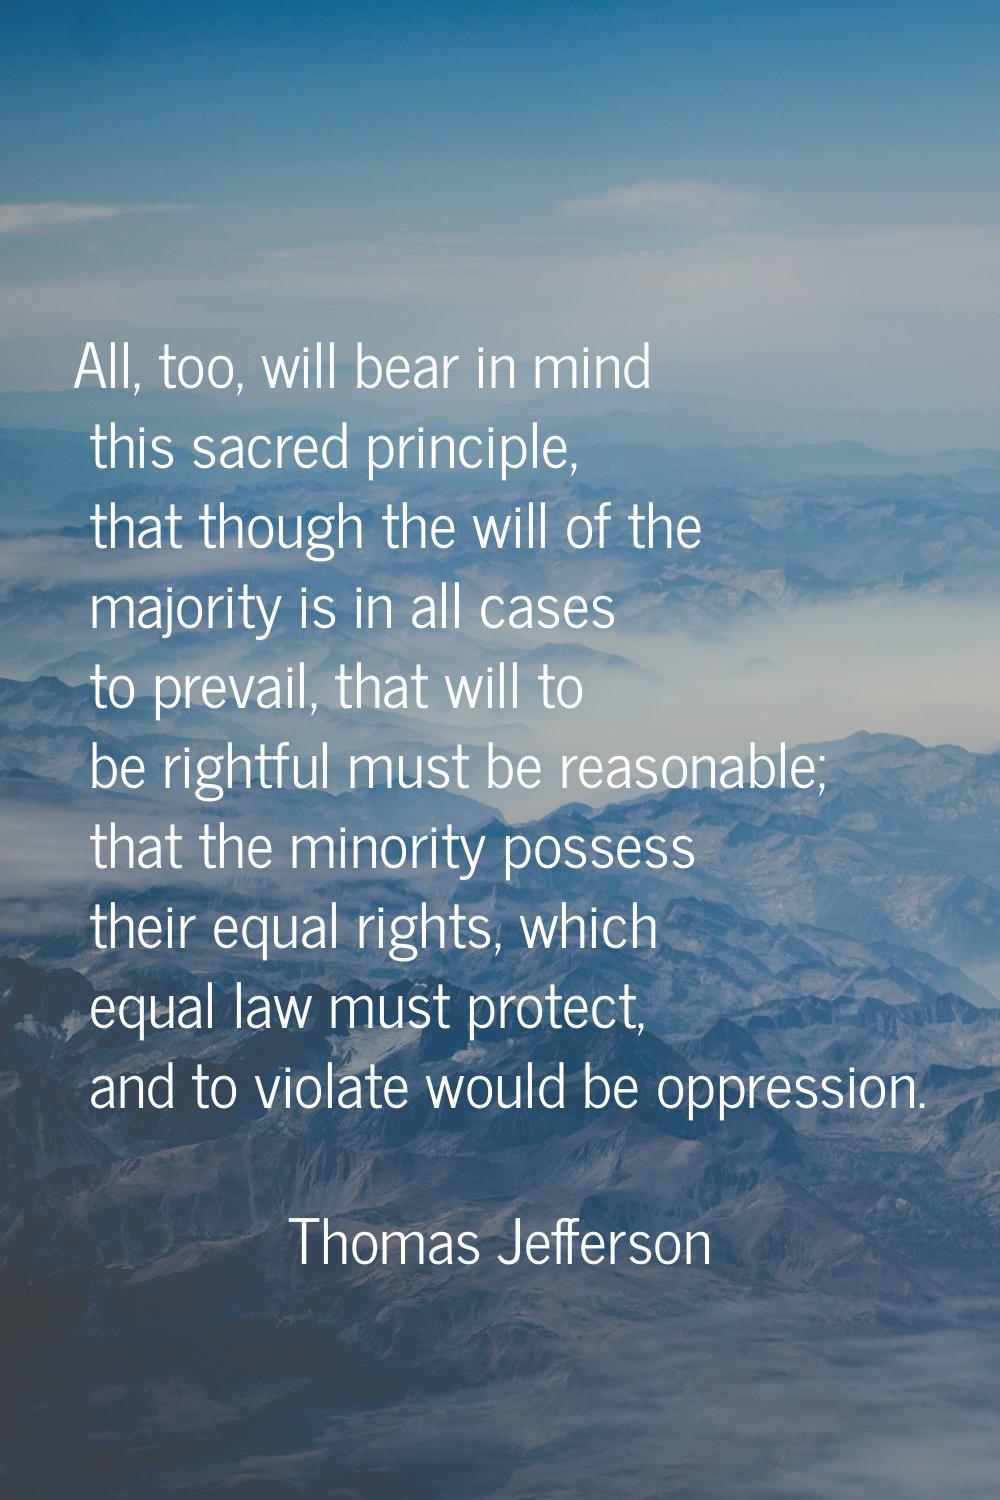 All, too, will bear in mind this sacred principle, that though the will of the majority is in all c